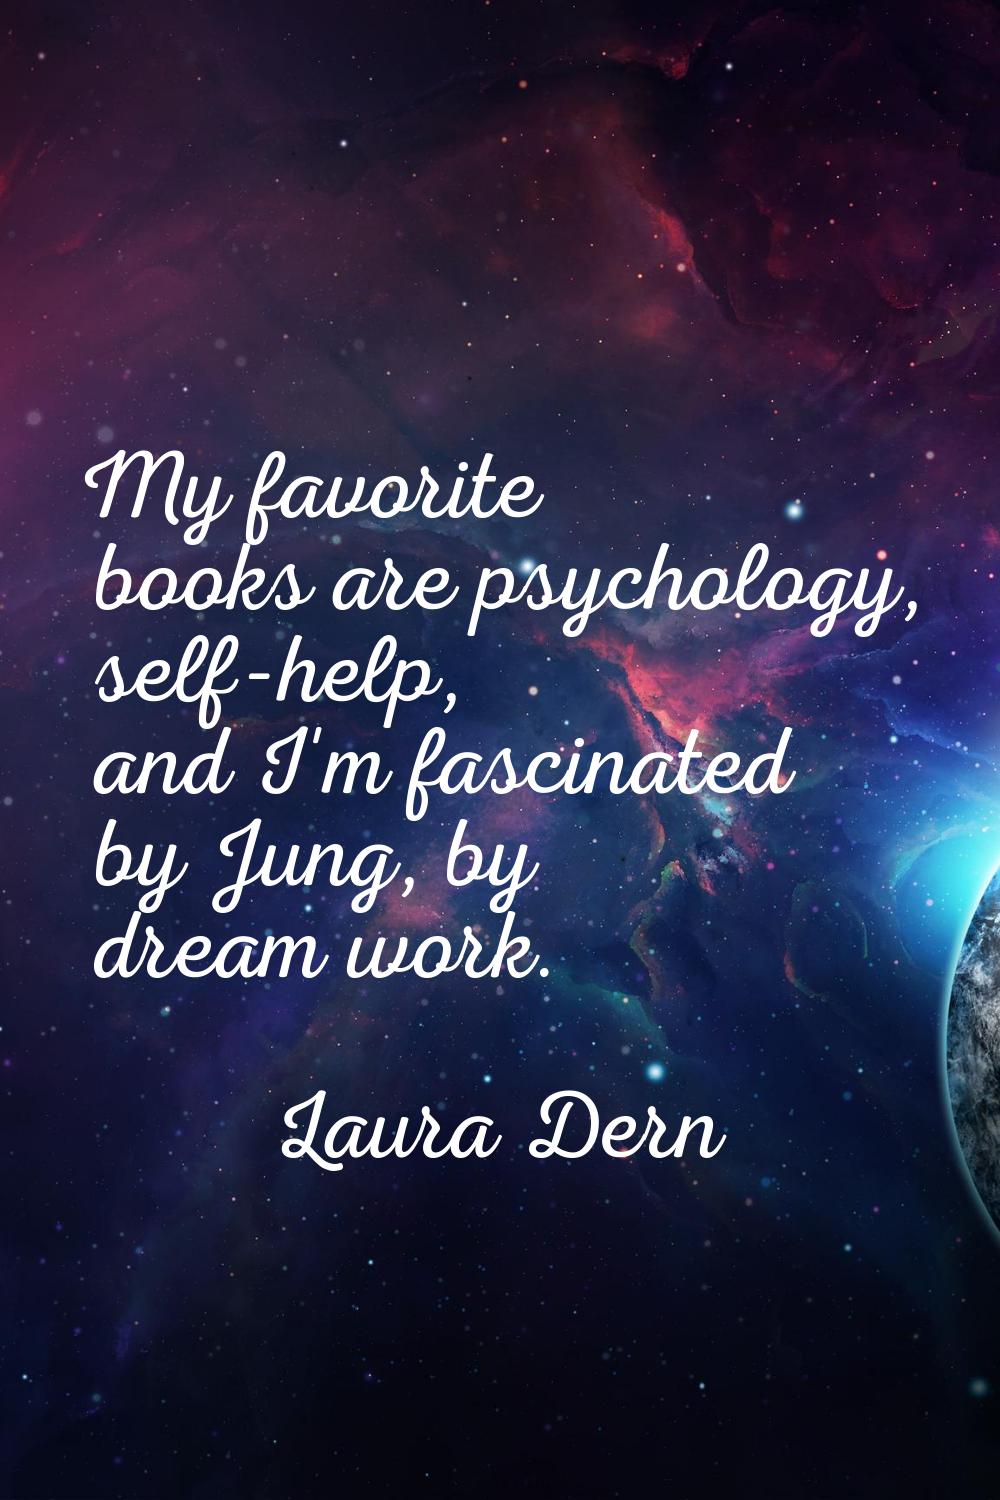 My favorite books are psychology, self-help, and I'm fascinated by Jung, by dream work.